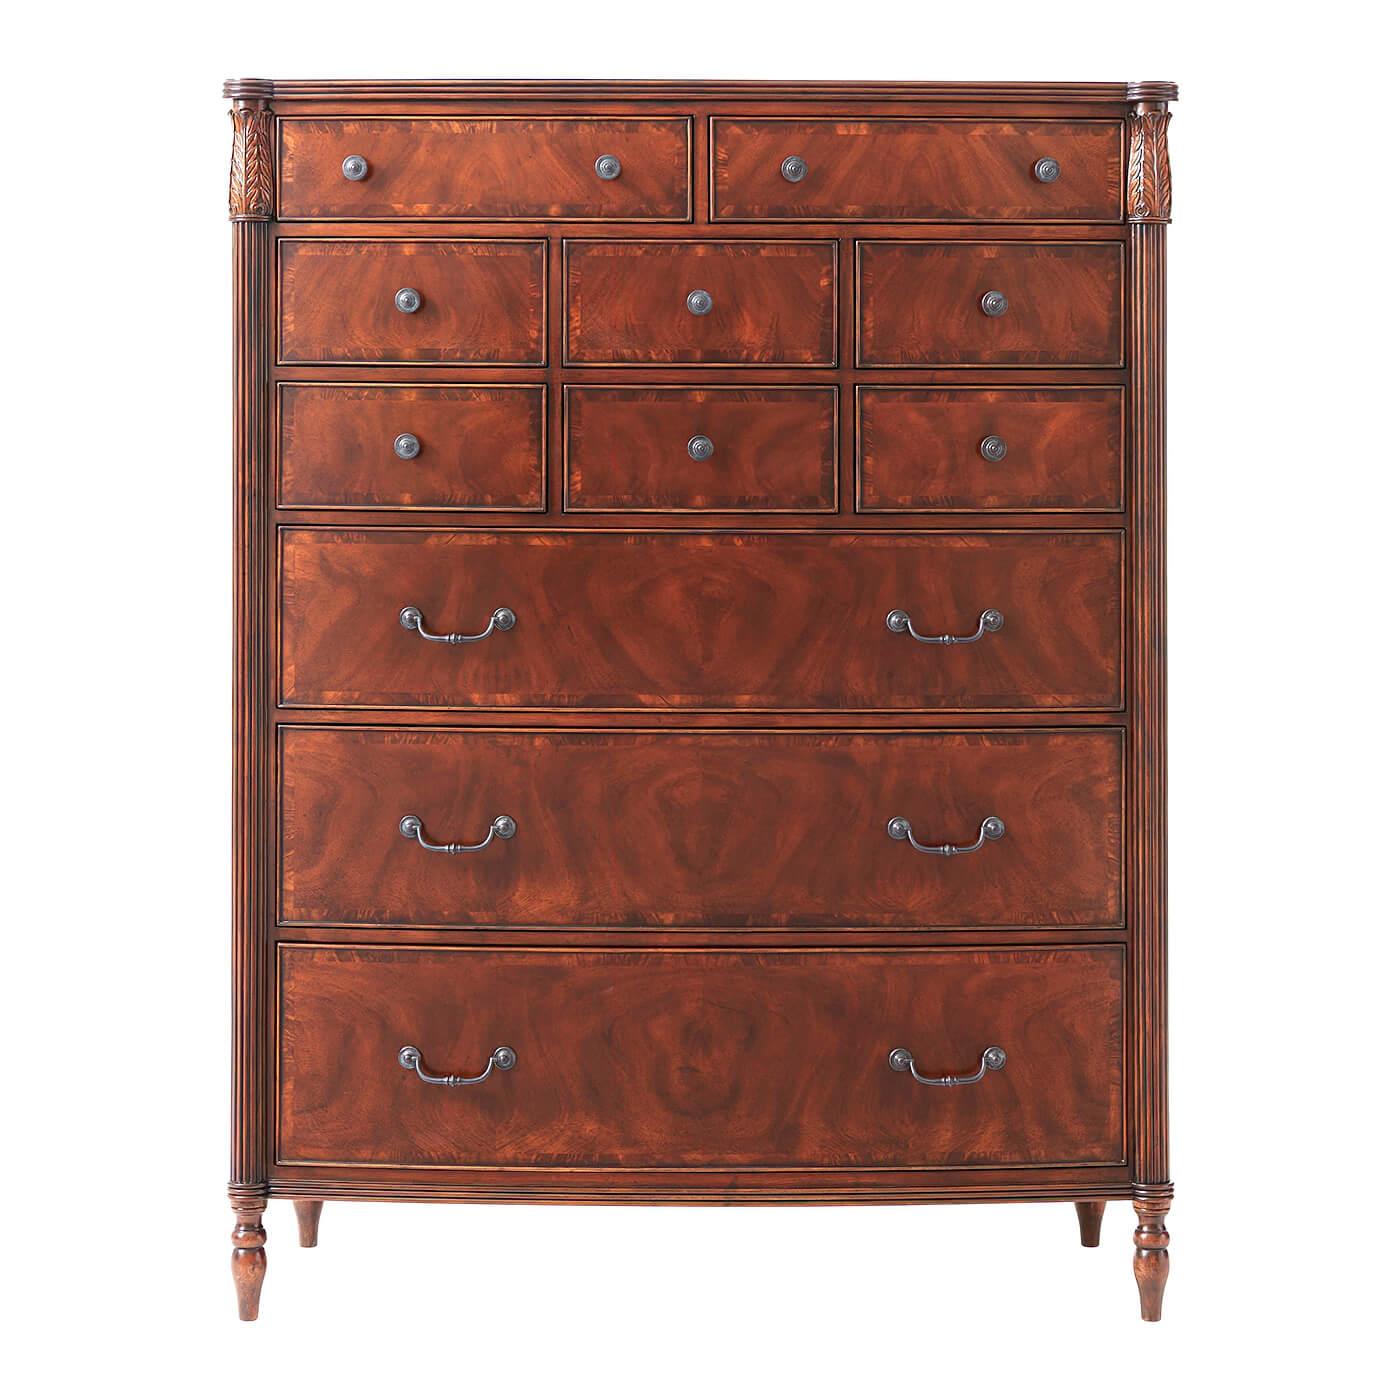 A Federal style mahogany and figured mahogany Gentleman's chest of drawers, the bowfront reeded edge top with protruding corners above leaf carved capital and reeded column supports, with an arrangement of eight short drawers and three long